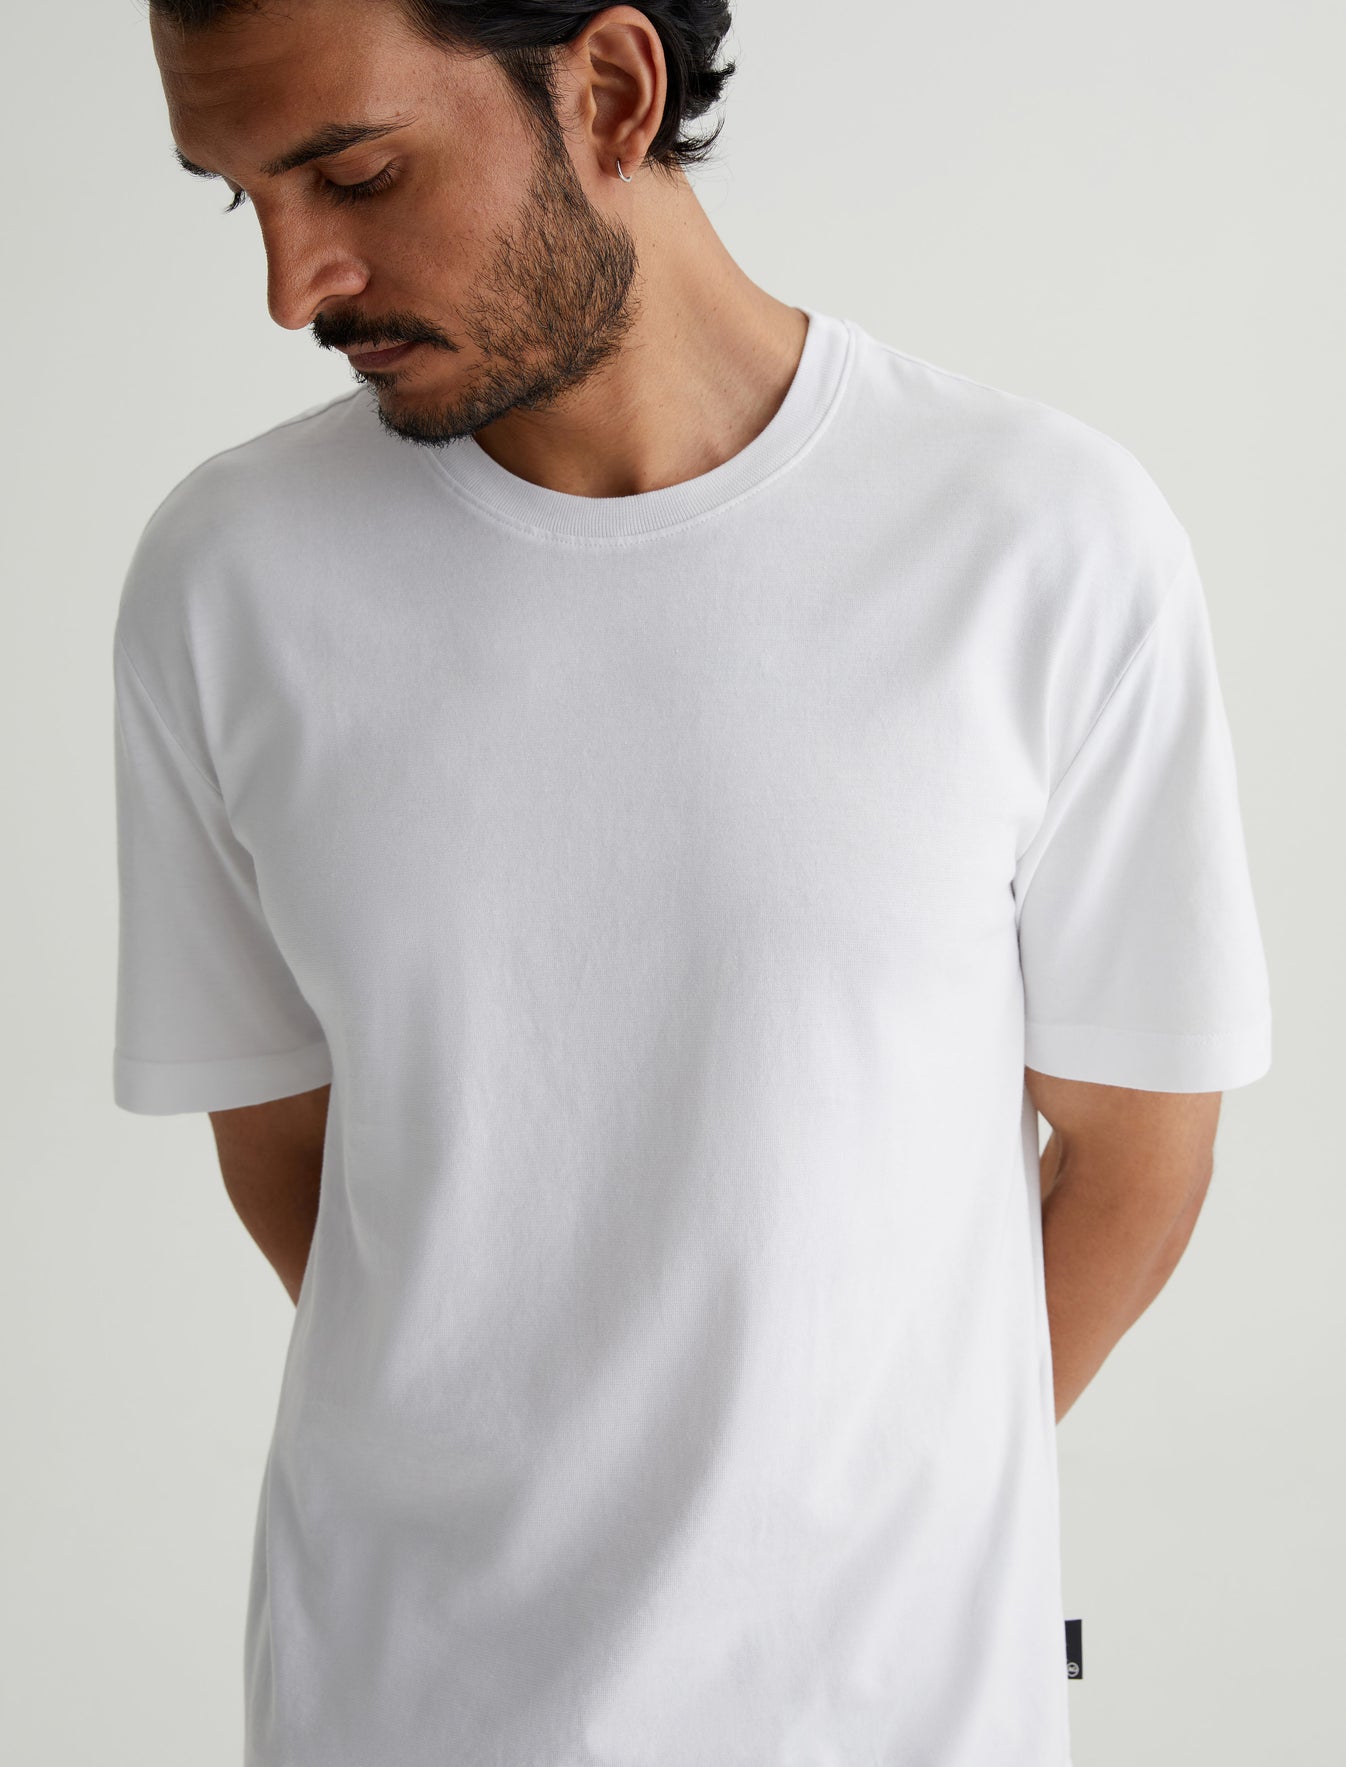 Wesley Crew True White Relaxed Fit Short Sleeve T-Shirt Mens Top Photo 3